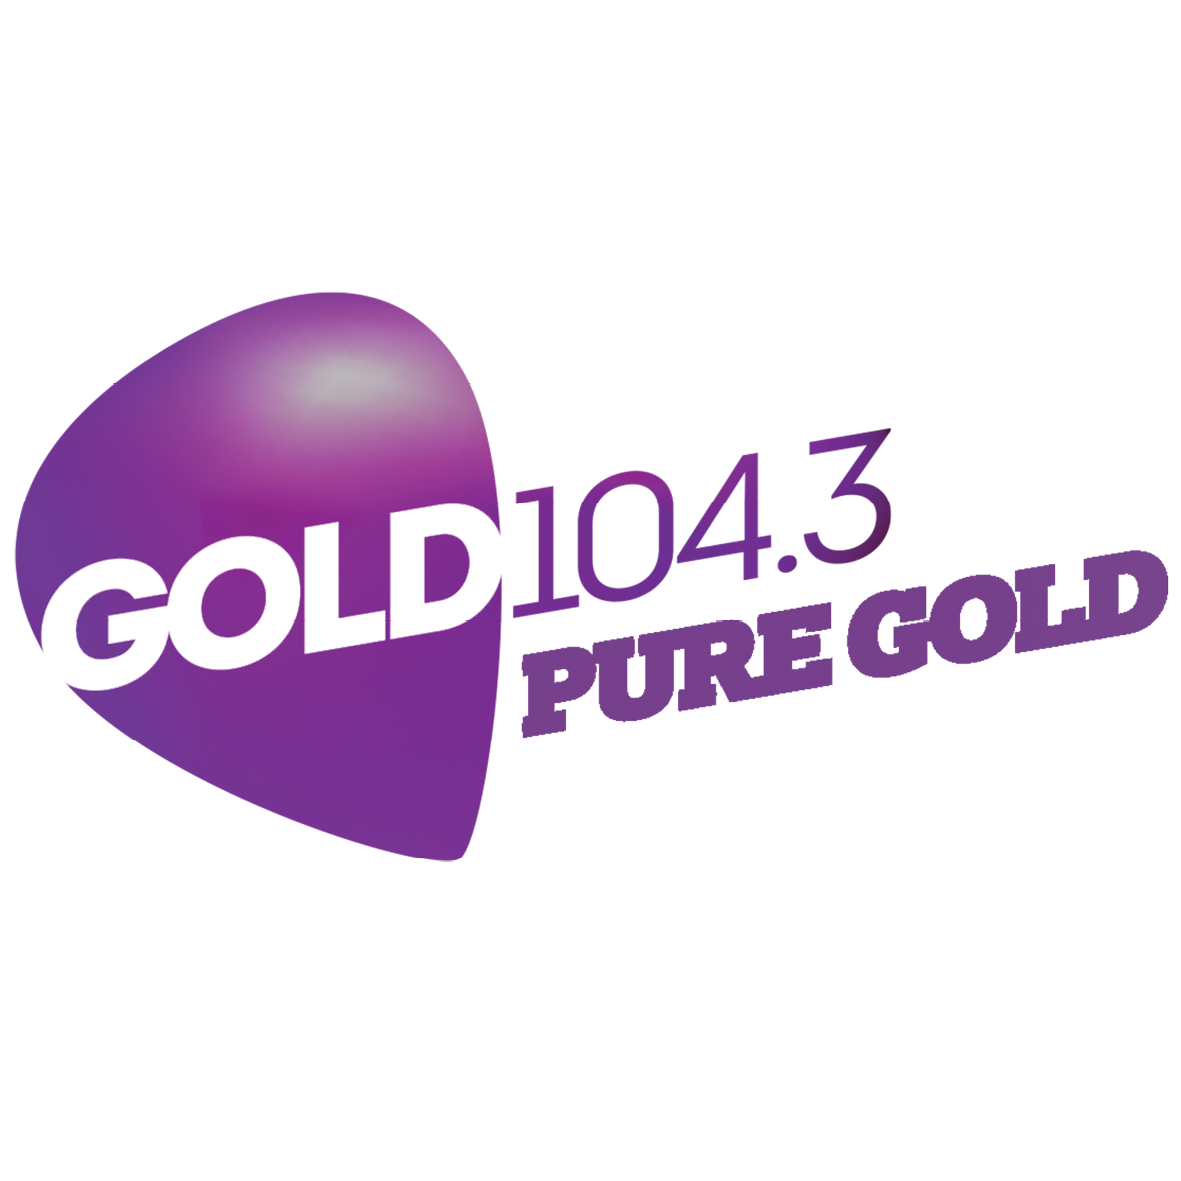 Gold1043 - Show opener Prince tribute